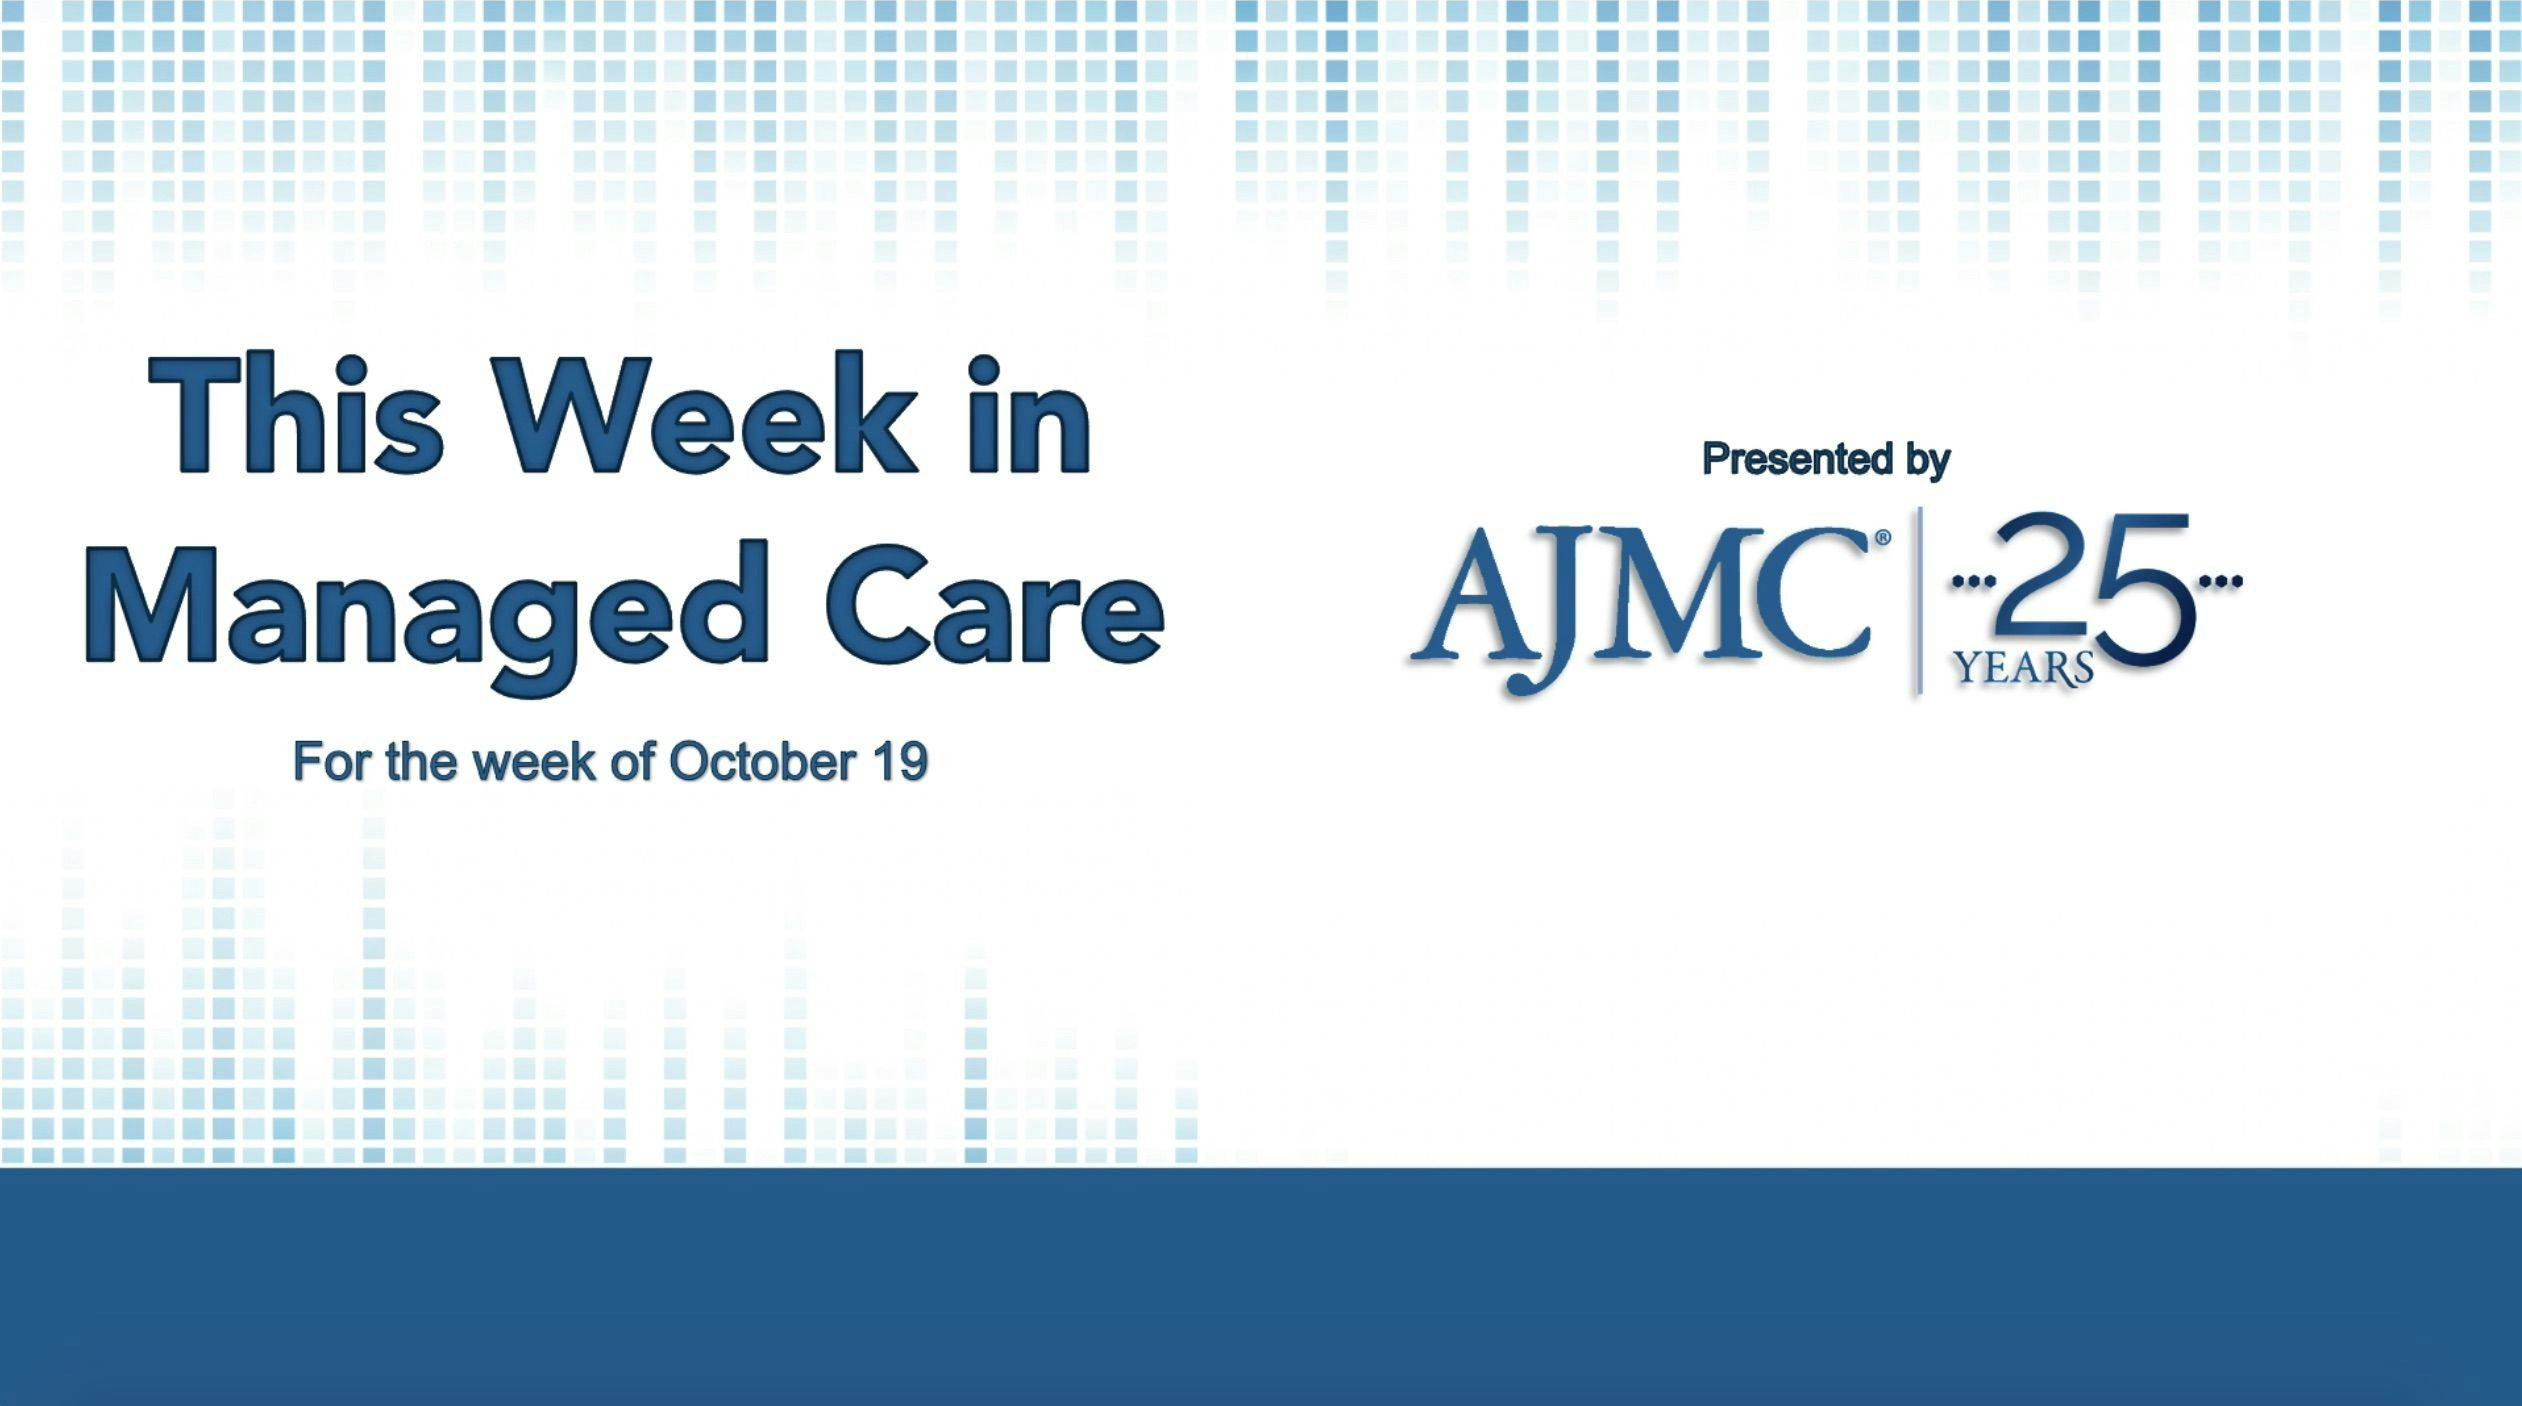 This Week in Managed Care for the week of October 19